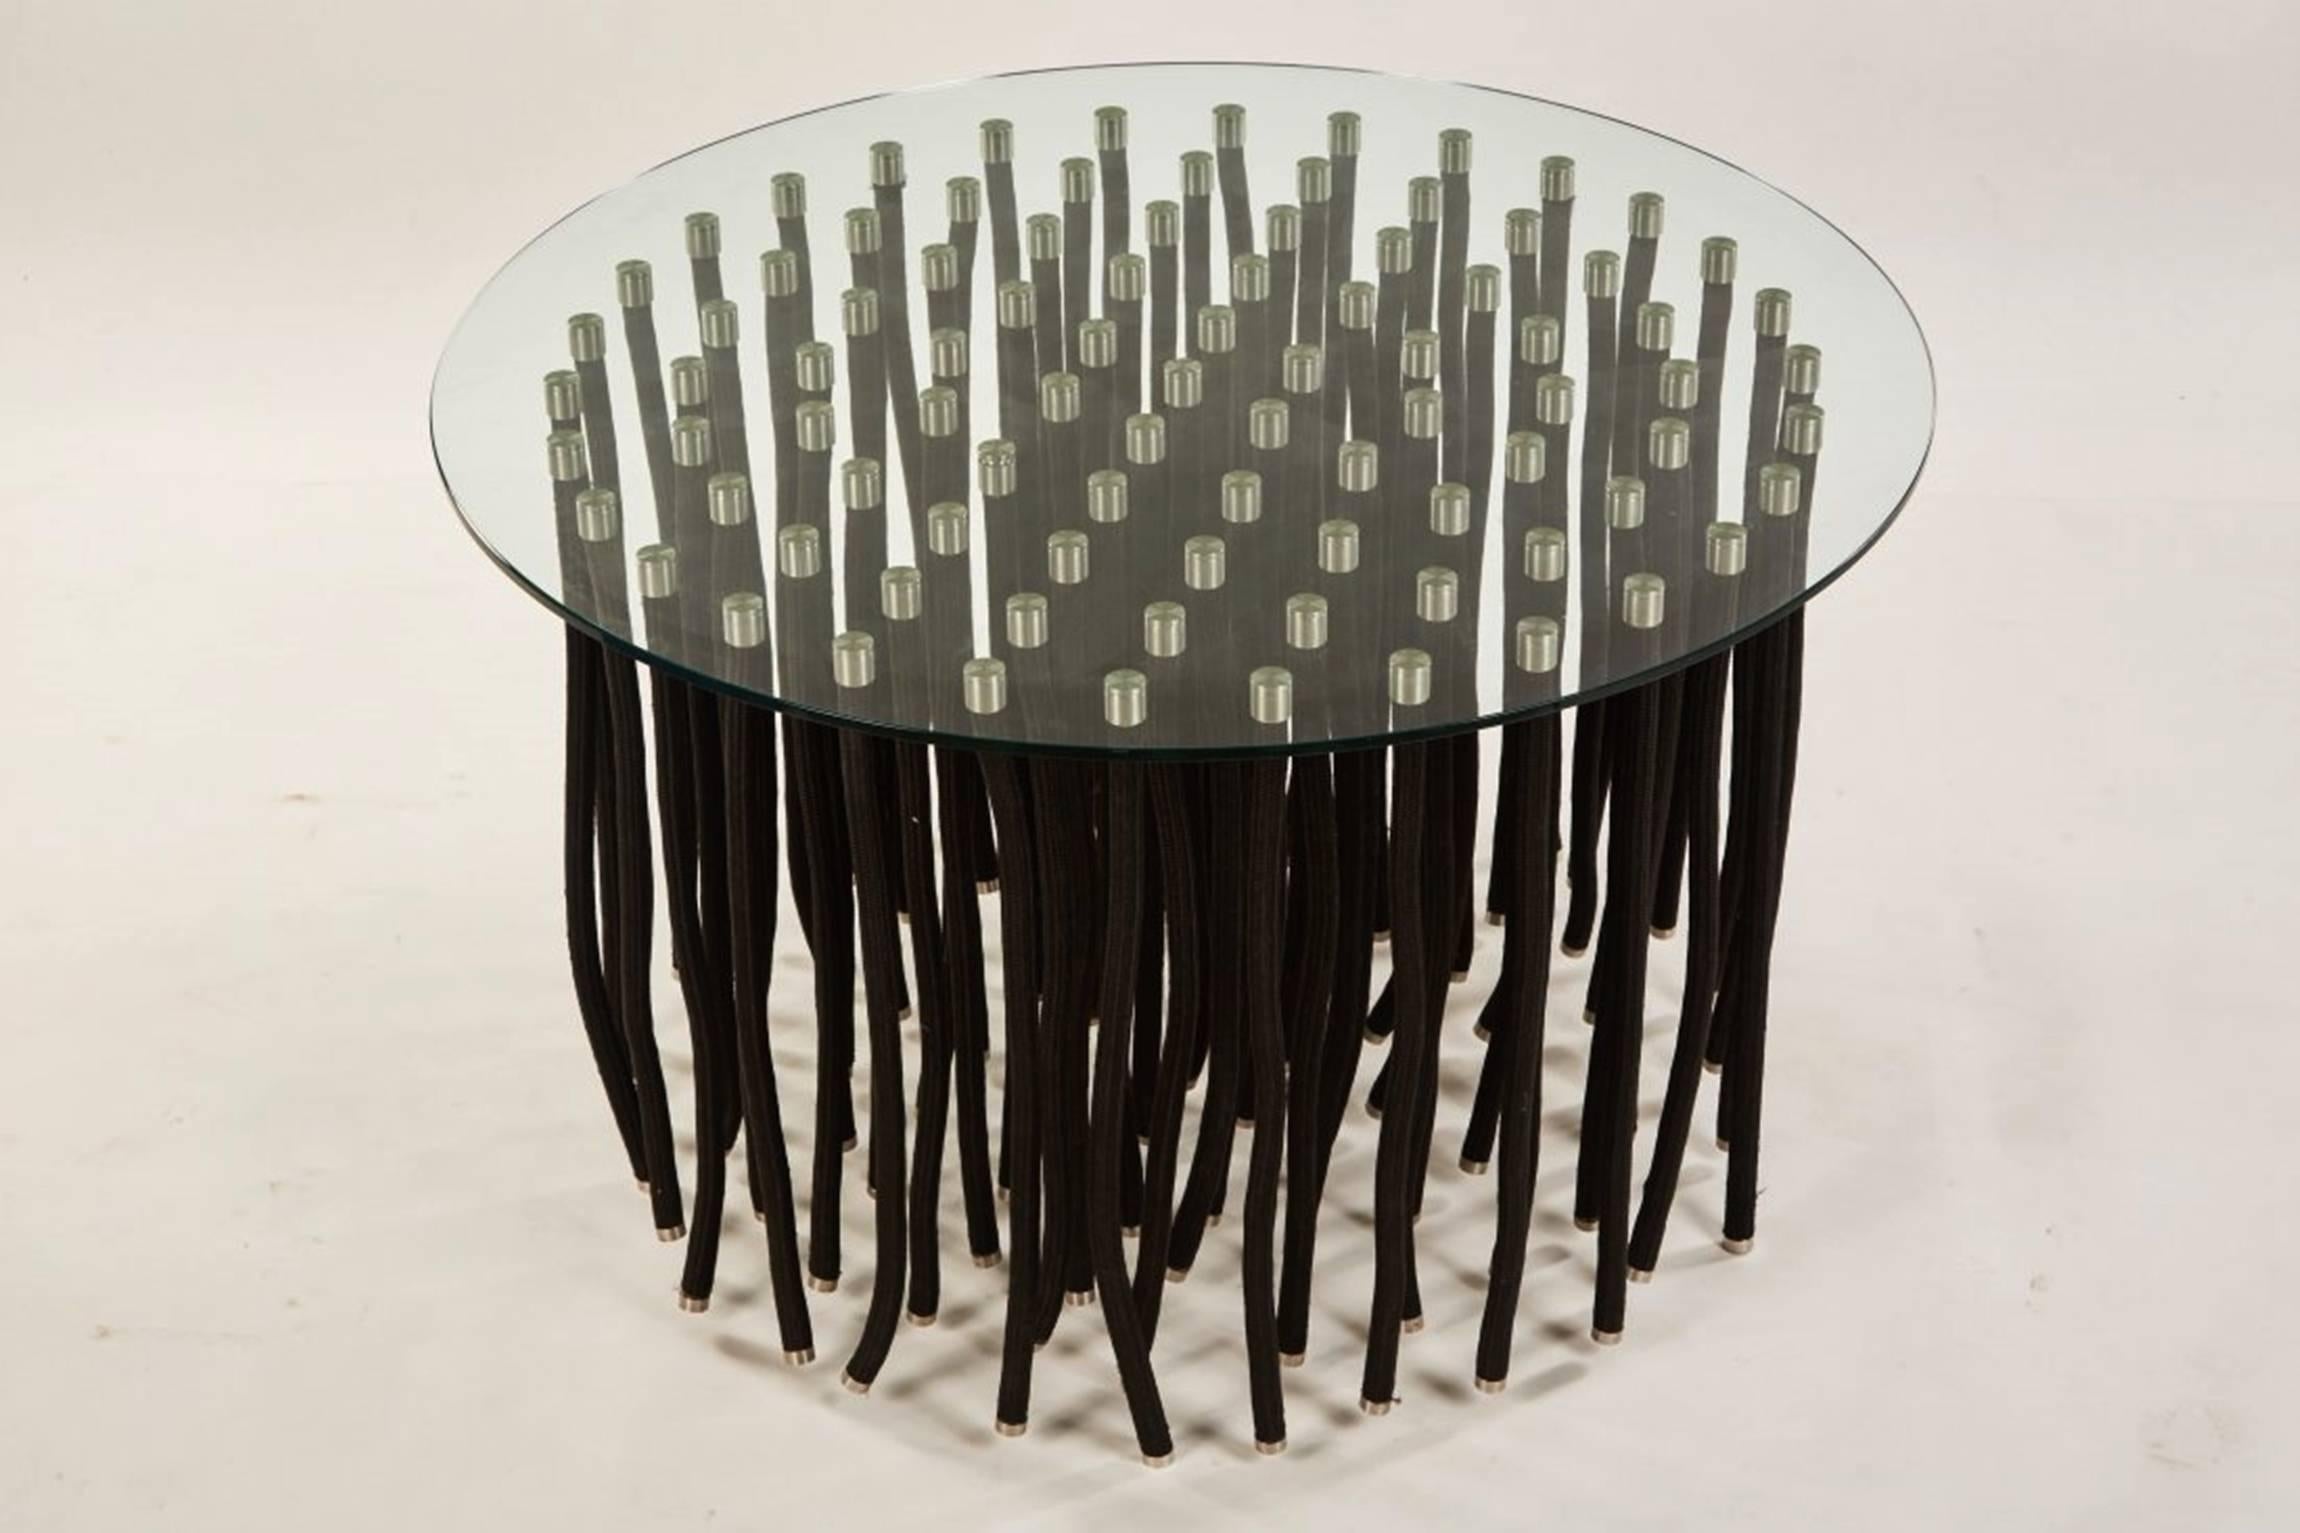 Stunning and beautiful ORG dining or center table designed by Fabio Novembre and manufactured by Capellini in Milano Italy in 2001.
The table is made out of flexible polypropylene with internal steel and satin stainless steel caps both on the top